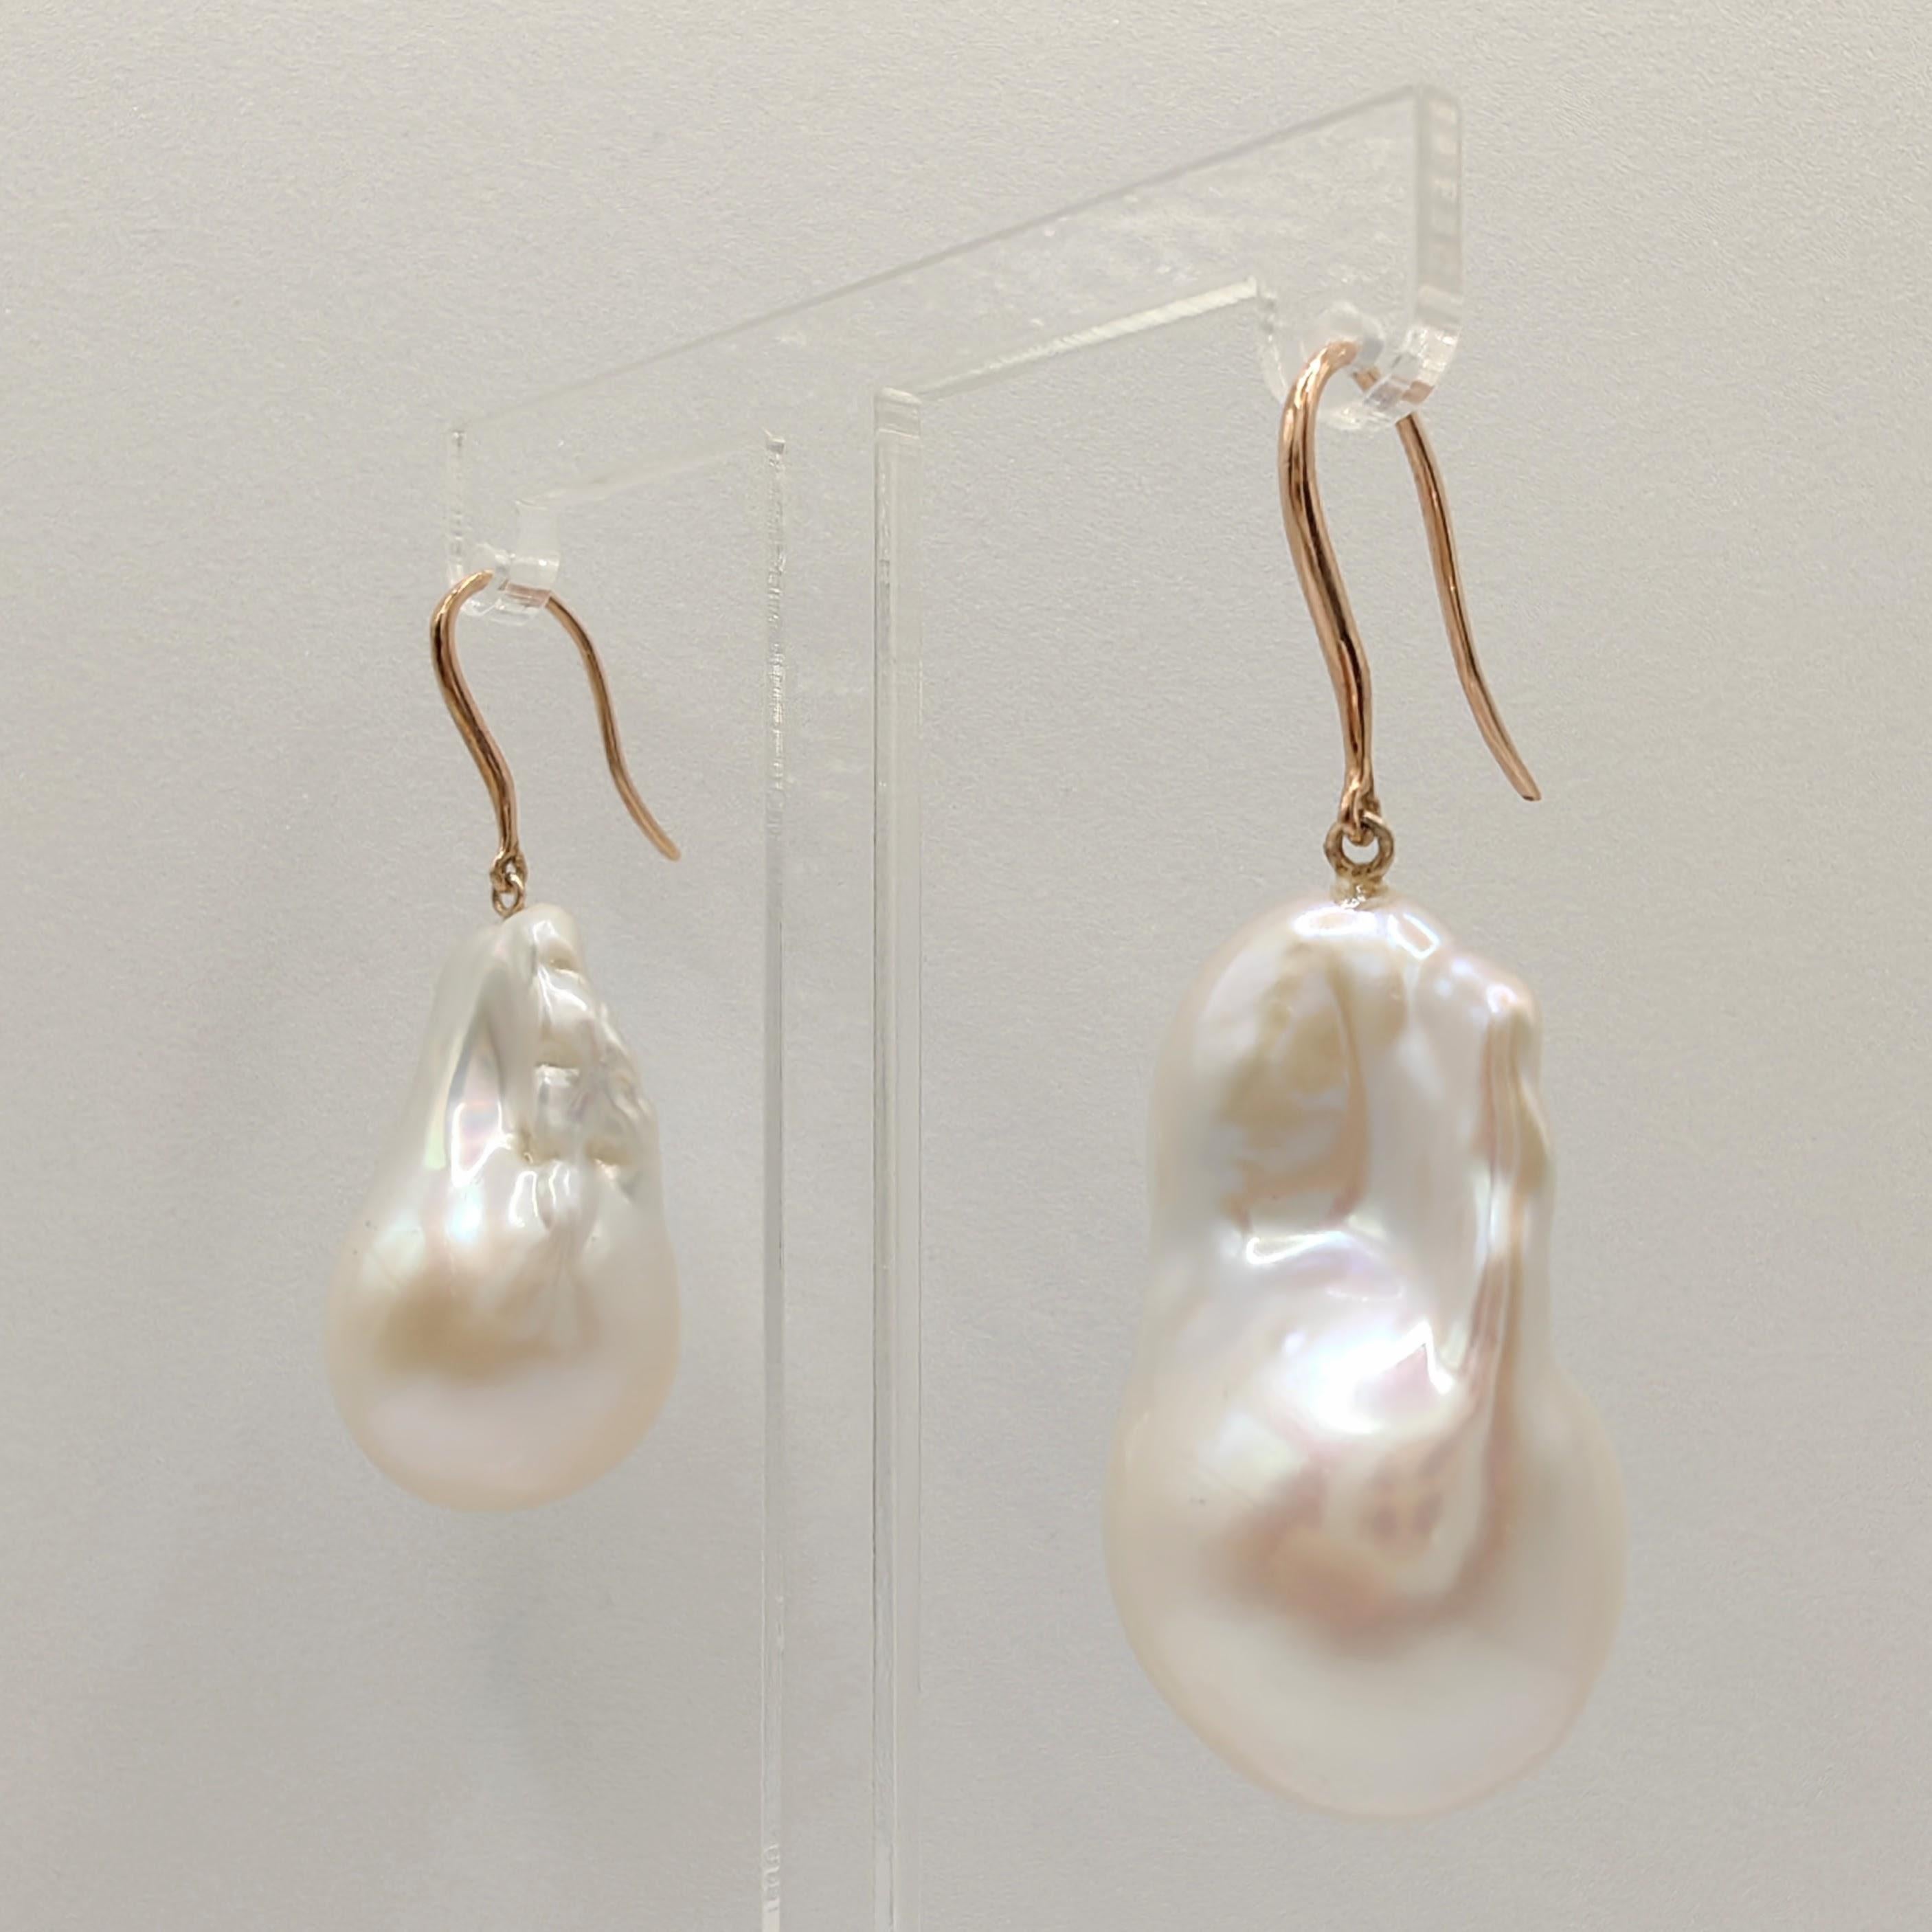 Contemporary Large Baroque Pearl Dangling Drop Earrings With 18K Rose Gold French Hooks